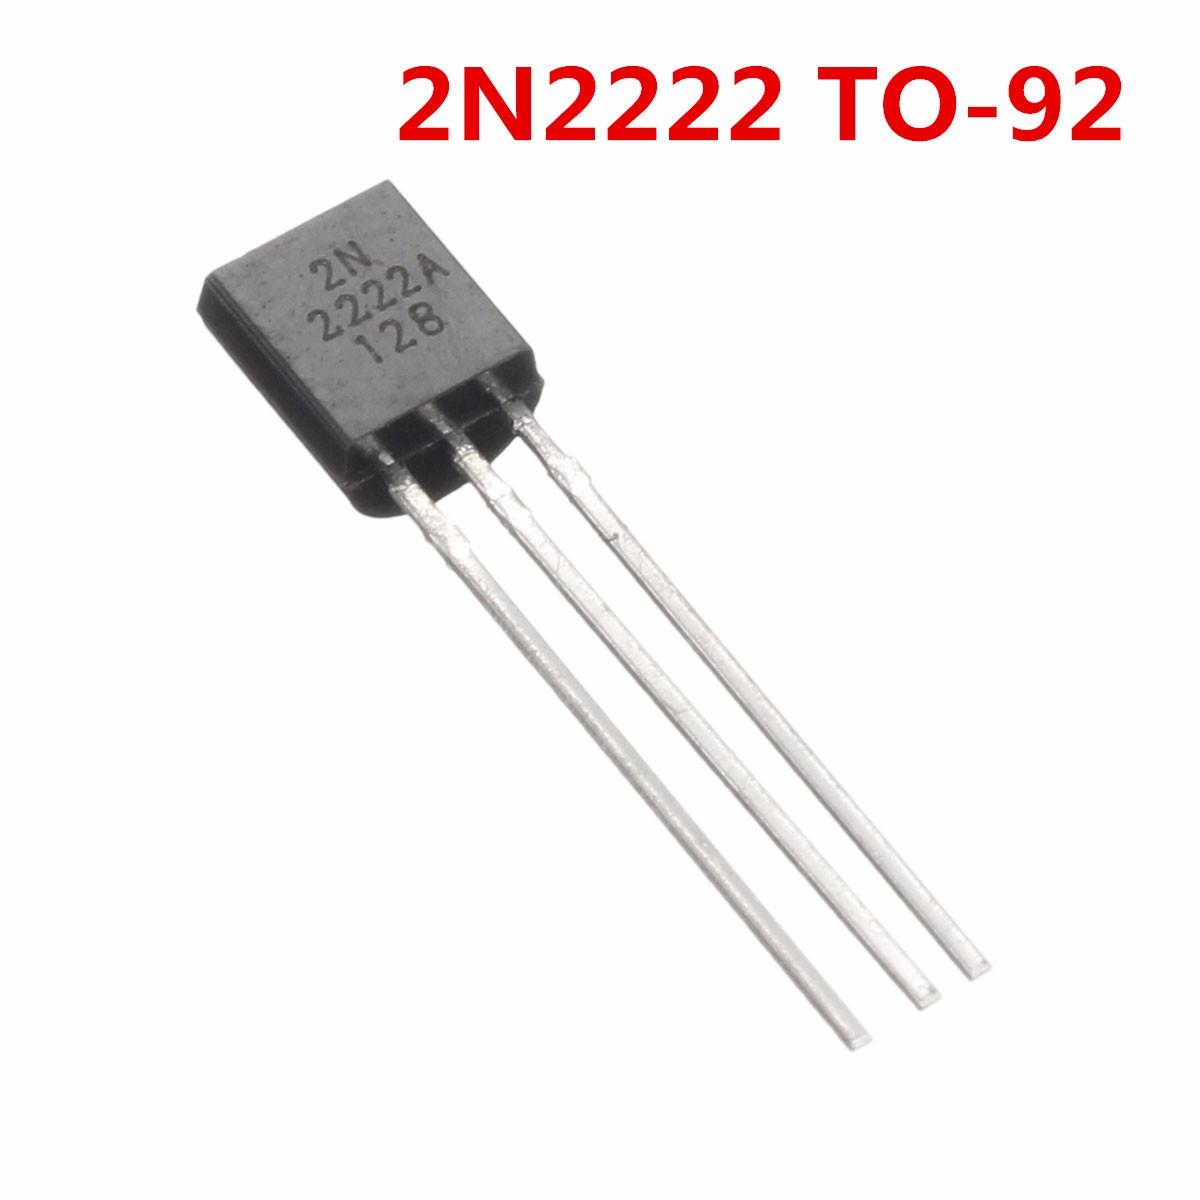 

40V 0.8A NPN Transistors 2N2222A 2N2222 TO-92For High-speed Switching